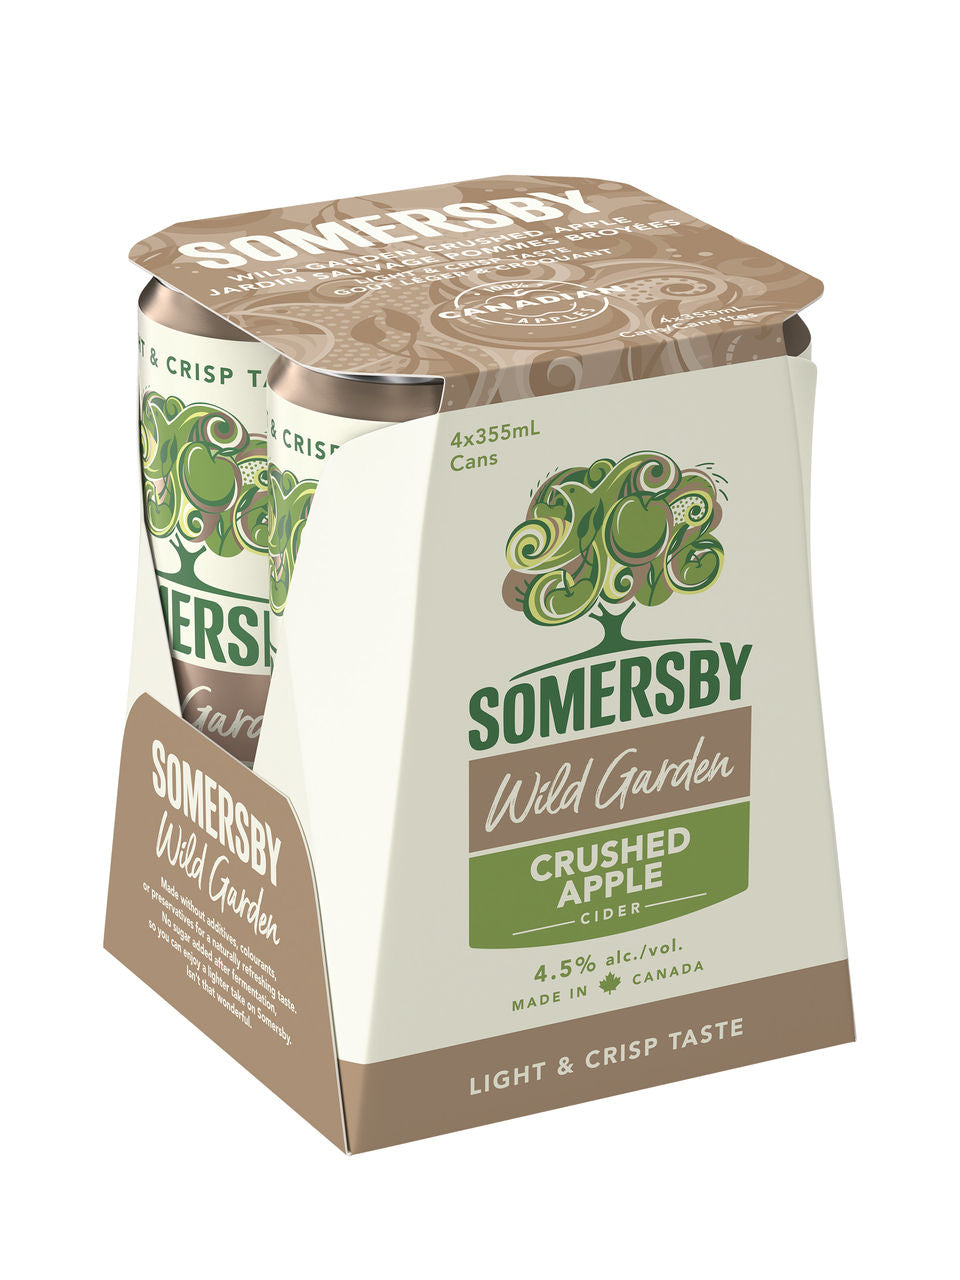 Somersby Wild Garden Crushed Apple Cider 4 x 355 ml can